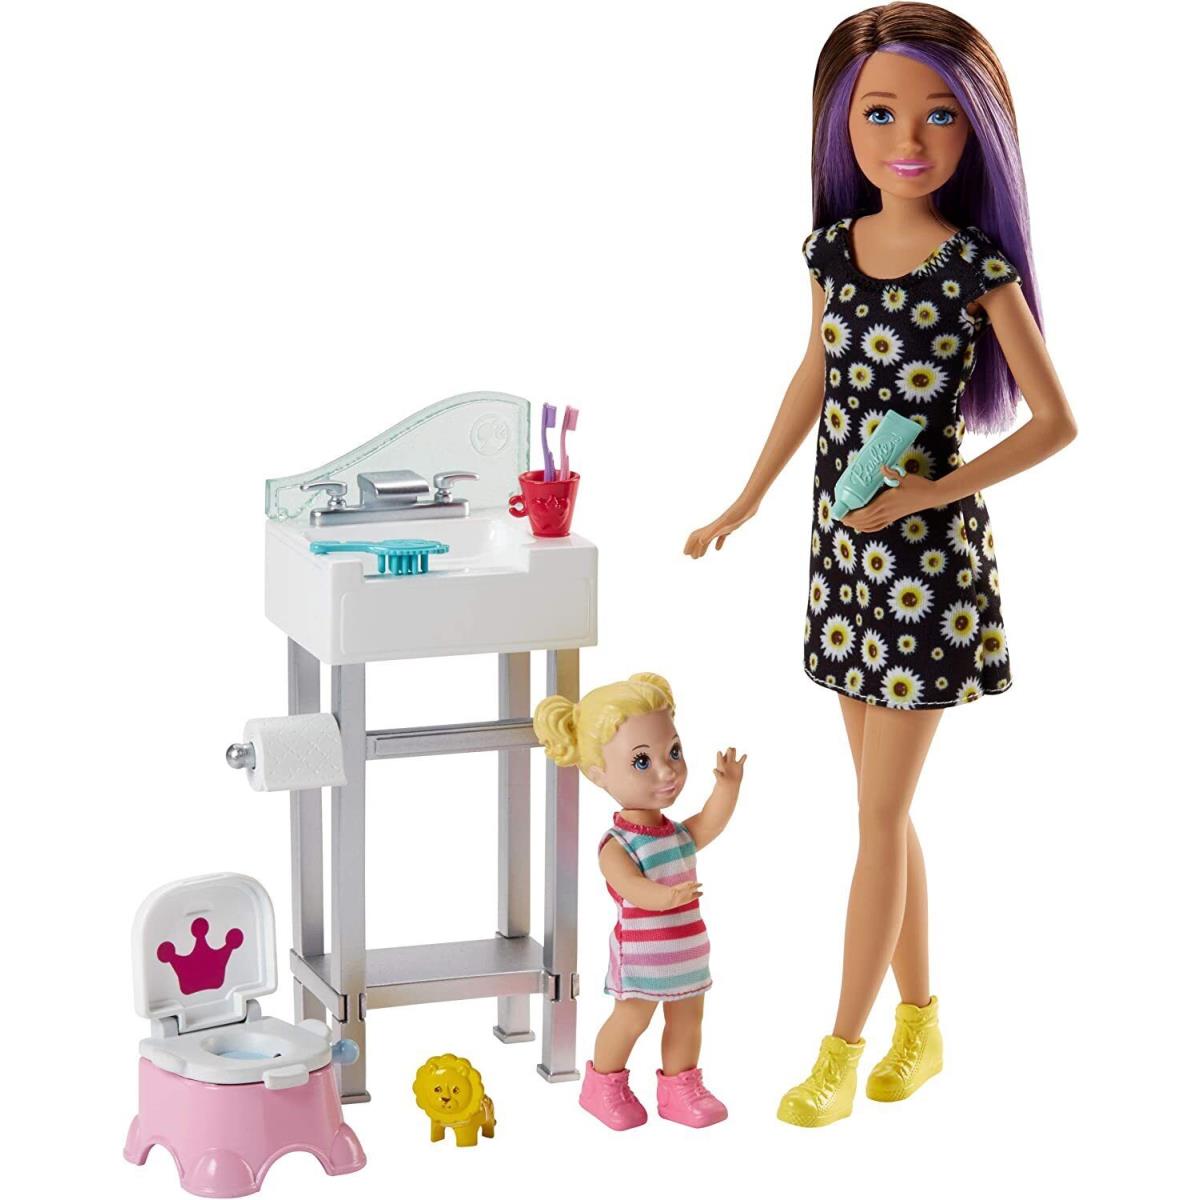 Barbie Babysitters Playset with Potty Chair Skipper Toddler Doll GGP44